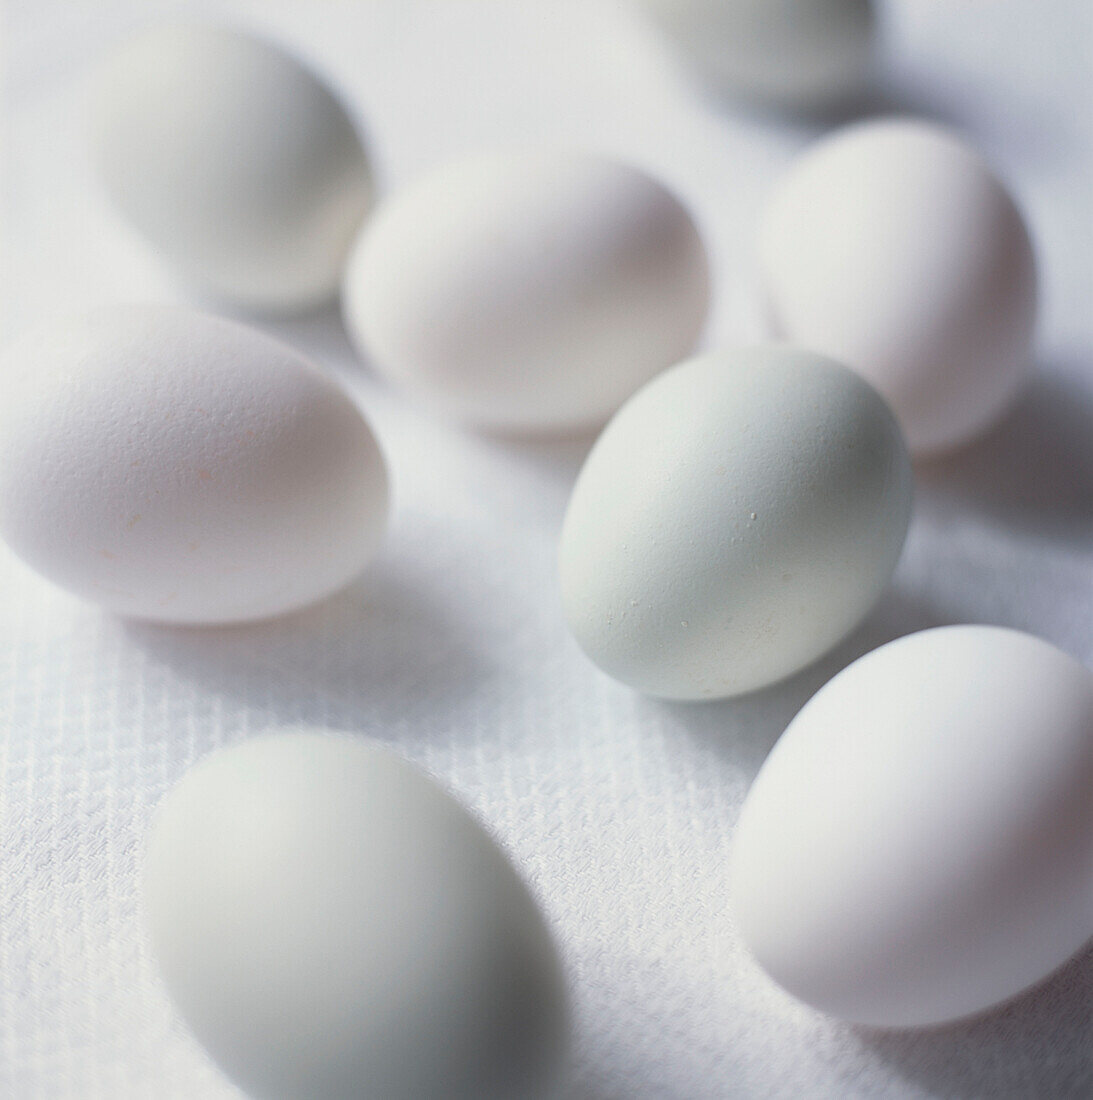 Group of chicken's eggs on a white linen background